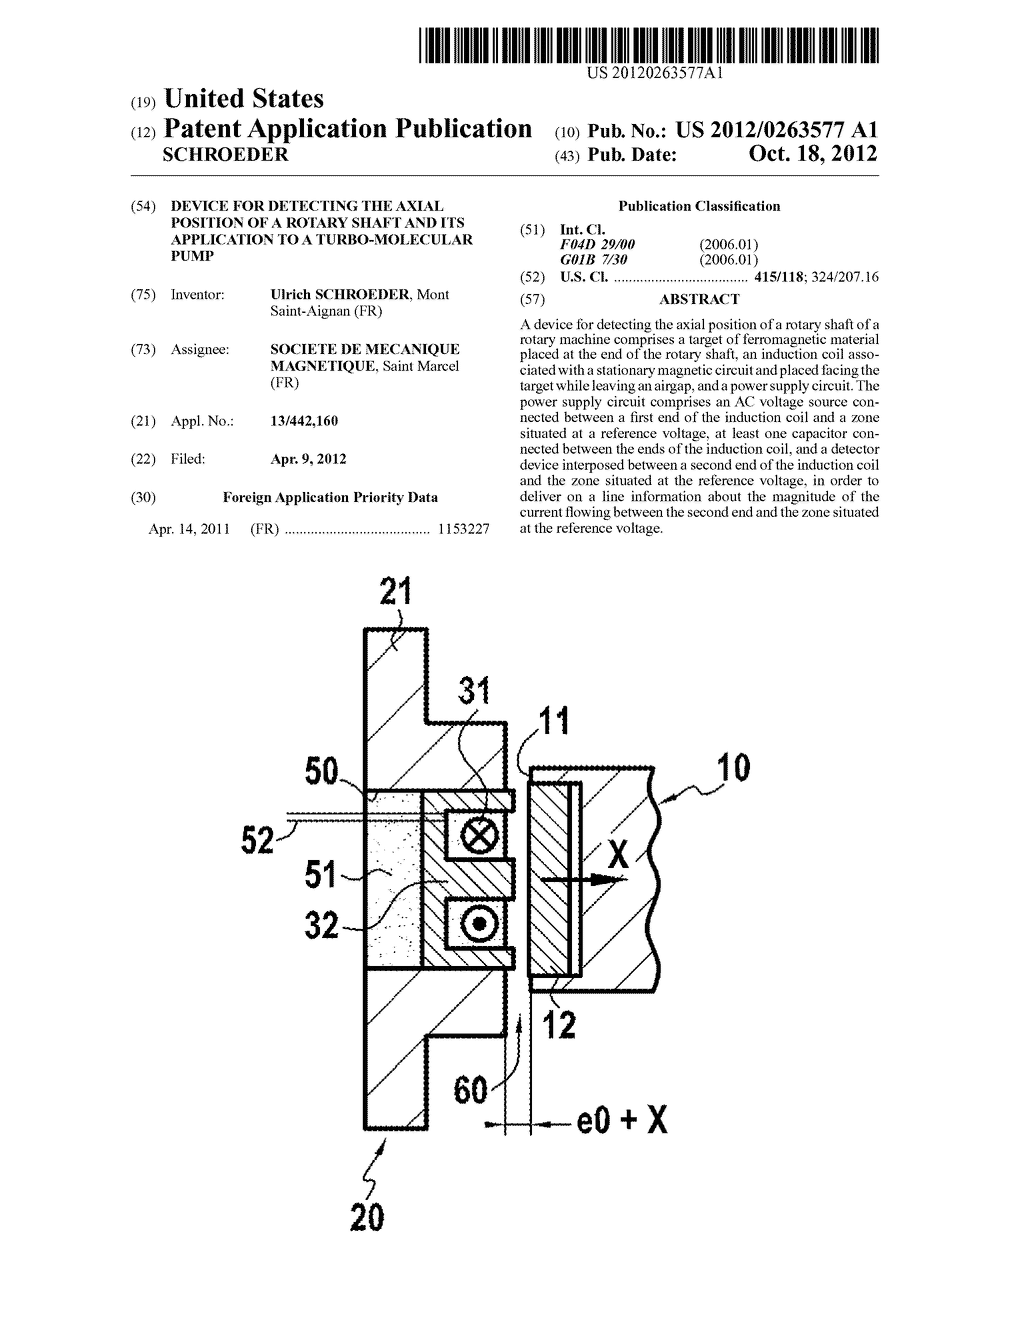 DEVICE FOR DETECTING THE AXIAL POSITION OF A ROTARY SHAFT AND ITS     APPLICATION TO A TURBO-MOLECULAR PUMP - diagram, schematic, and image 01